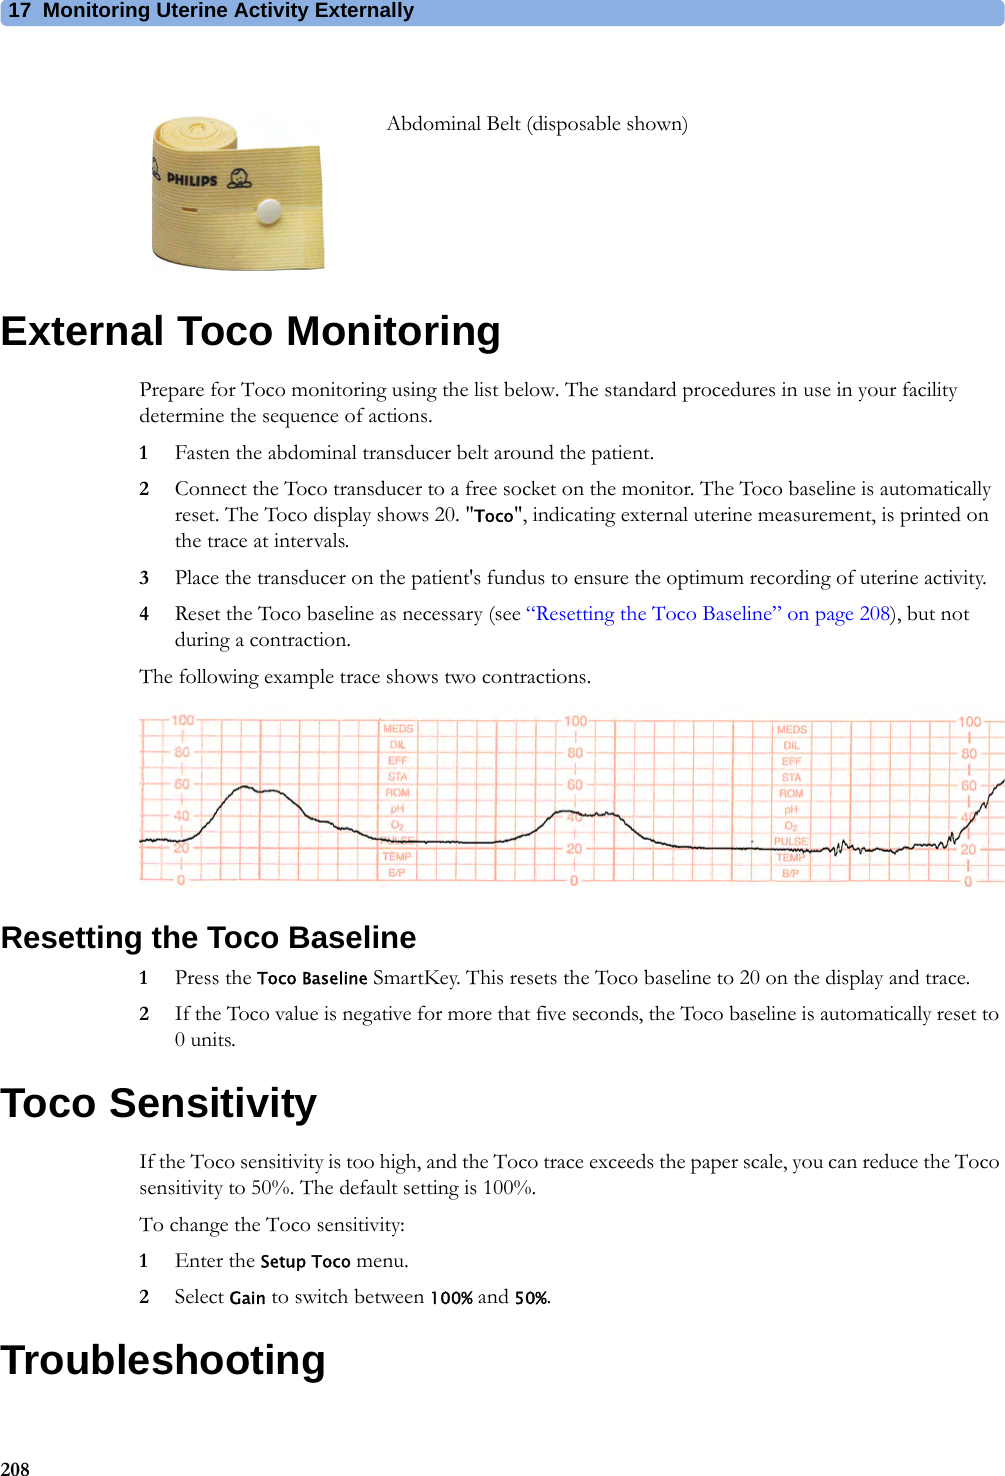 17  Monitoring Uterine Activity Externally208External Toco MonitoringPrepare for Toco monitoring using the list below. The standard procedures in use in your facility determine the sequence of actions.1Fasten the abdominal transducer belt around the patient.2Connect the Toco transducer to a free socket on the monitor. The Toco baseline is automatically reset. The Toco display shows 20. &quot;Toco&quot;, indicating external uterine measurement, is printed on the trace at intervals.3Place the transducer on the patient&apos;s fundus to ensure the optimum recording of uterine activity.4Reset the Toco baseline as necessary (see “Resetting the Toco Baseline” on page 208), but not during a contraction.The following example trace shows two contractions.Resetting the Toco Baseline1Press the Toco Baseline SmartKey. This resets the Toco baseline to 20 on the display and trace.2If the Toco value is negative for more that five seconds, the Toco baseline is automatically reset to 0 units.Toco SensitivityIf the Toco sensitivity is too high, and the Toco trace exceeds the paper scale, you can reduce the Toco sensitivity to 50%. The default setting is 100%.To change the Toco sensitivity:1Enter the Setup Toco menu.2Select Gain to switch between 100% and 50%.TroubleshootingAbdominal Belt (disposable shown)